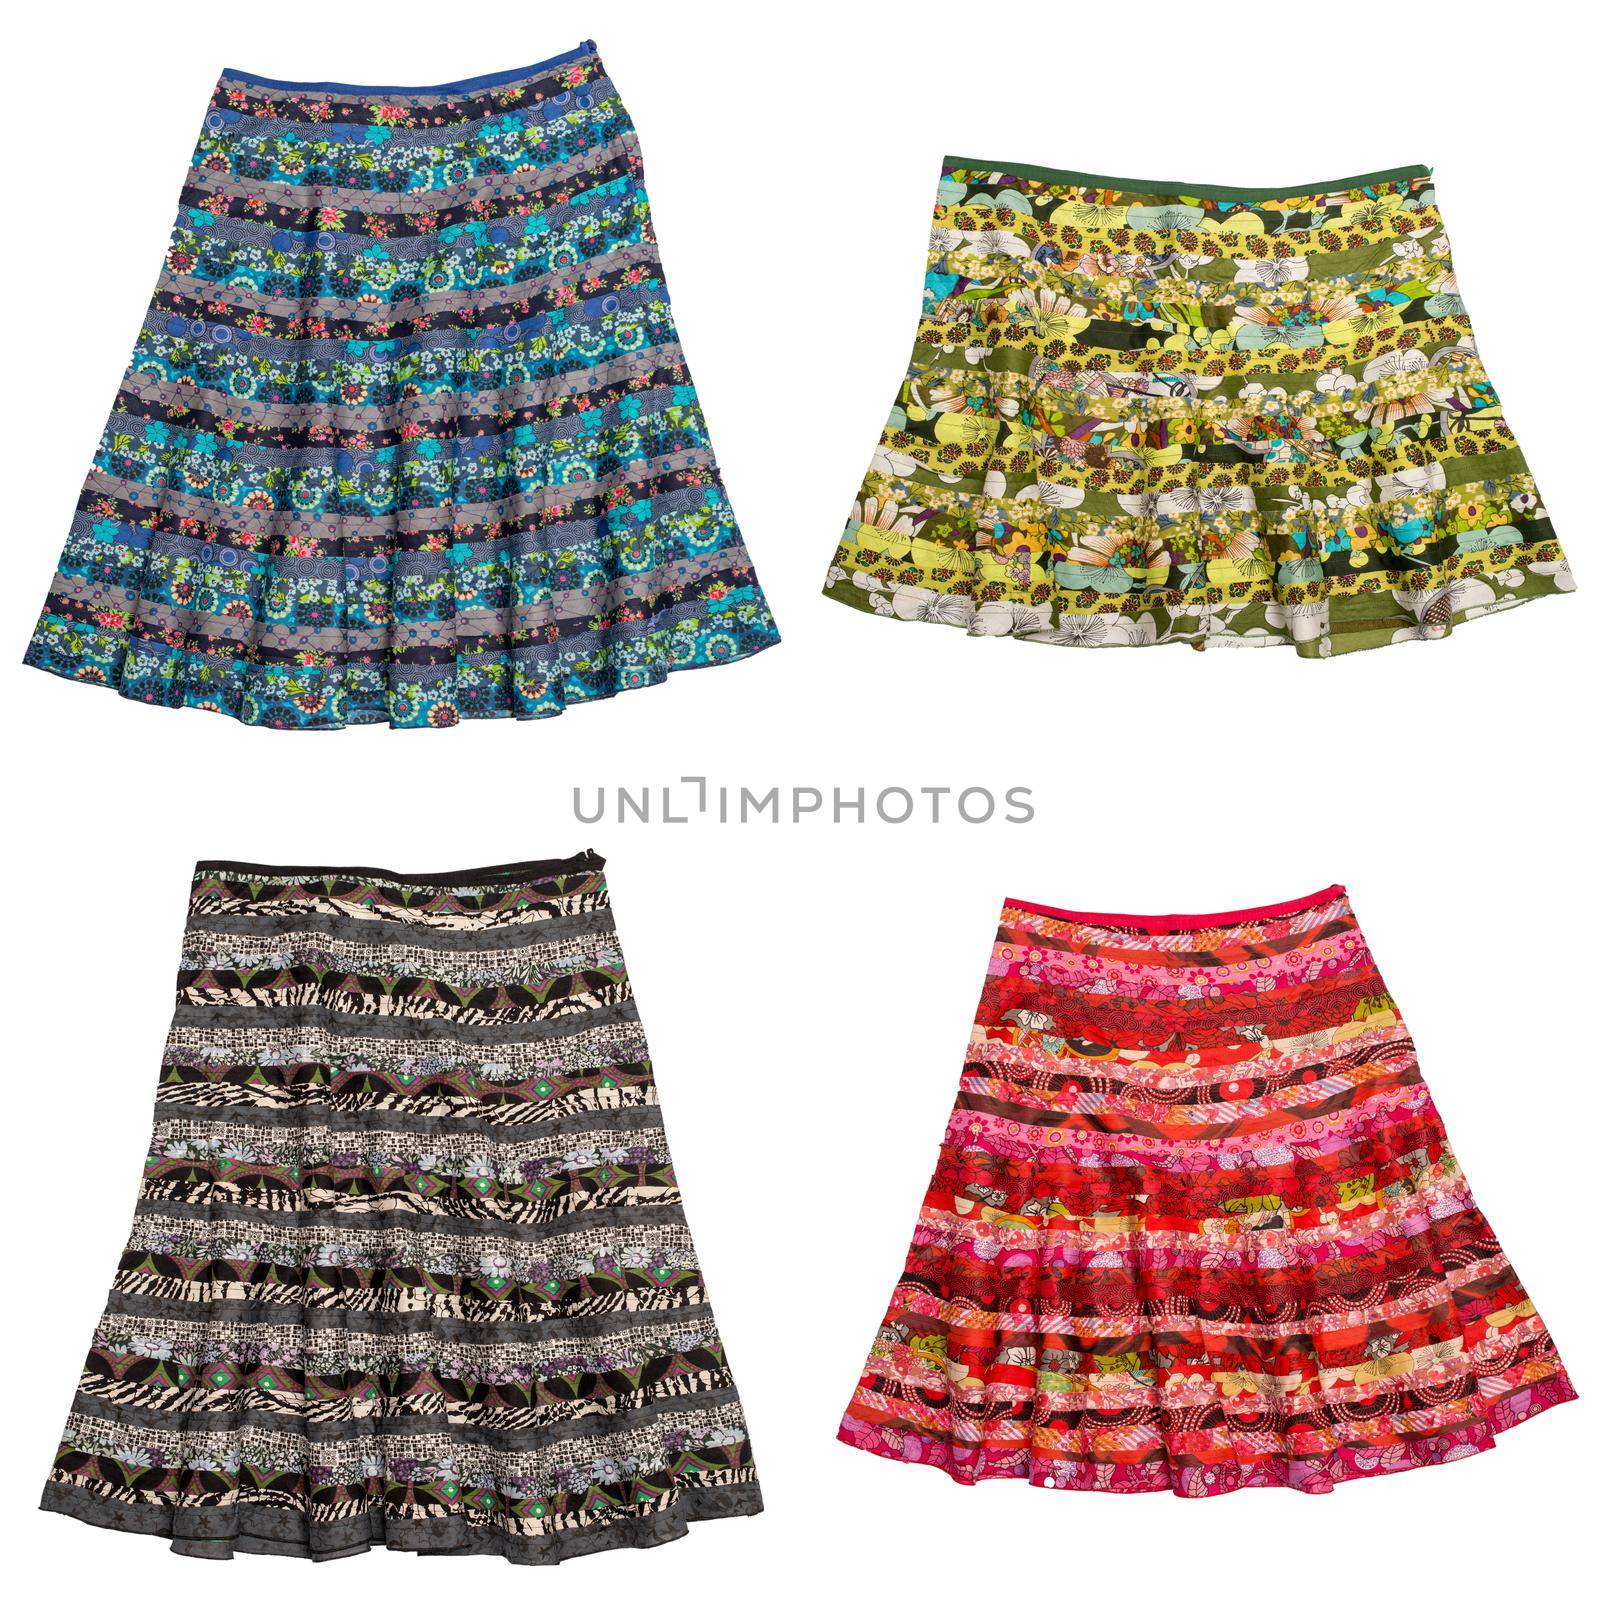 Colorful indian style patchwork skirts isolated on white background.